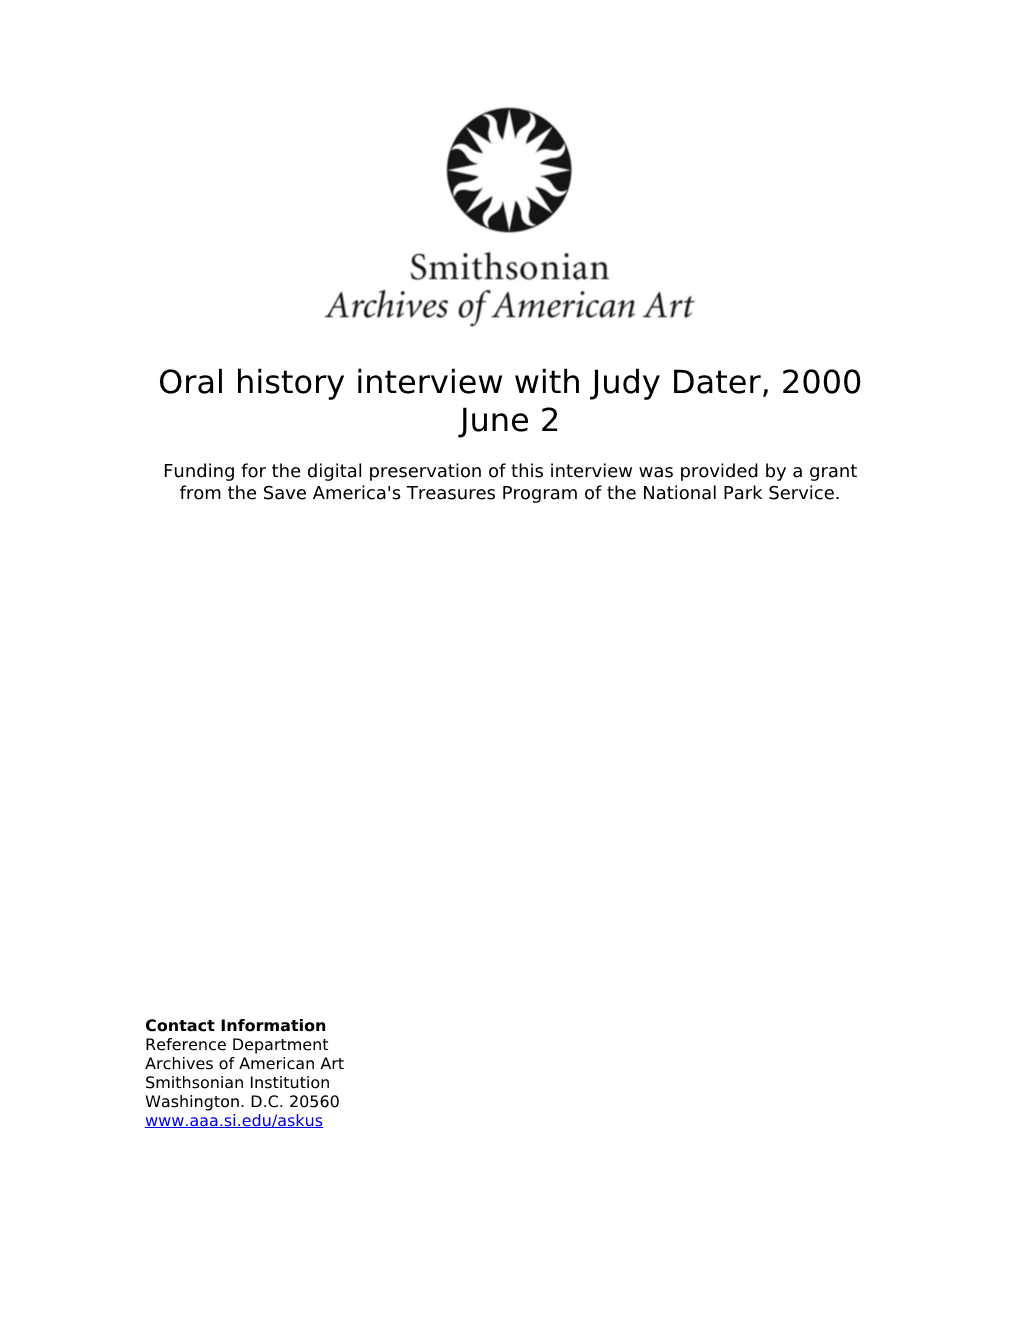 Oral History Interview with Judy Dater, 2000 June 2